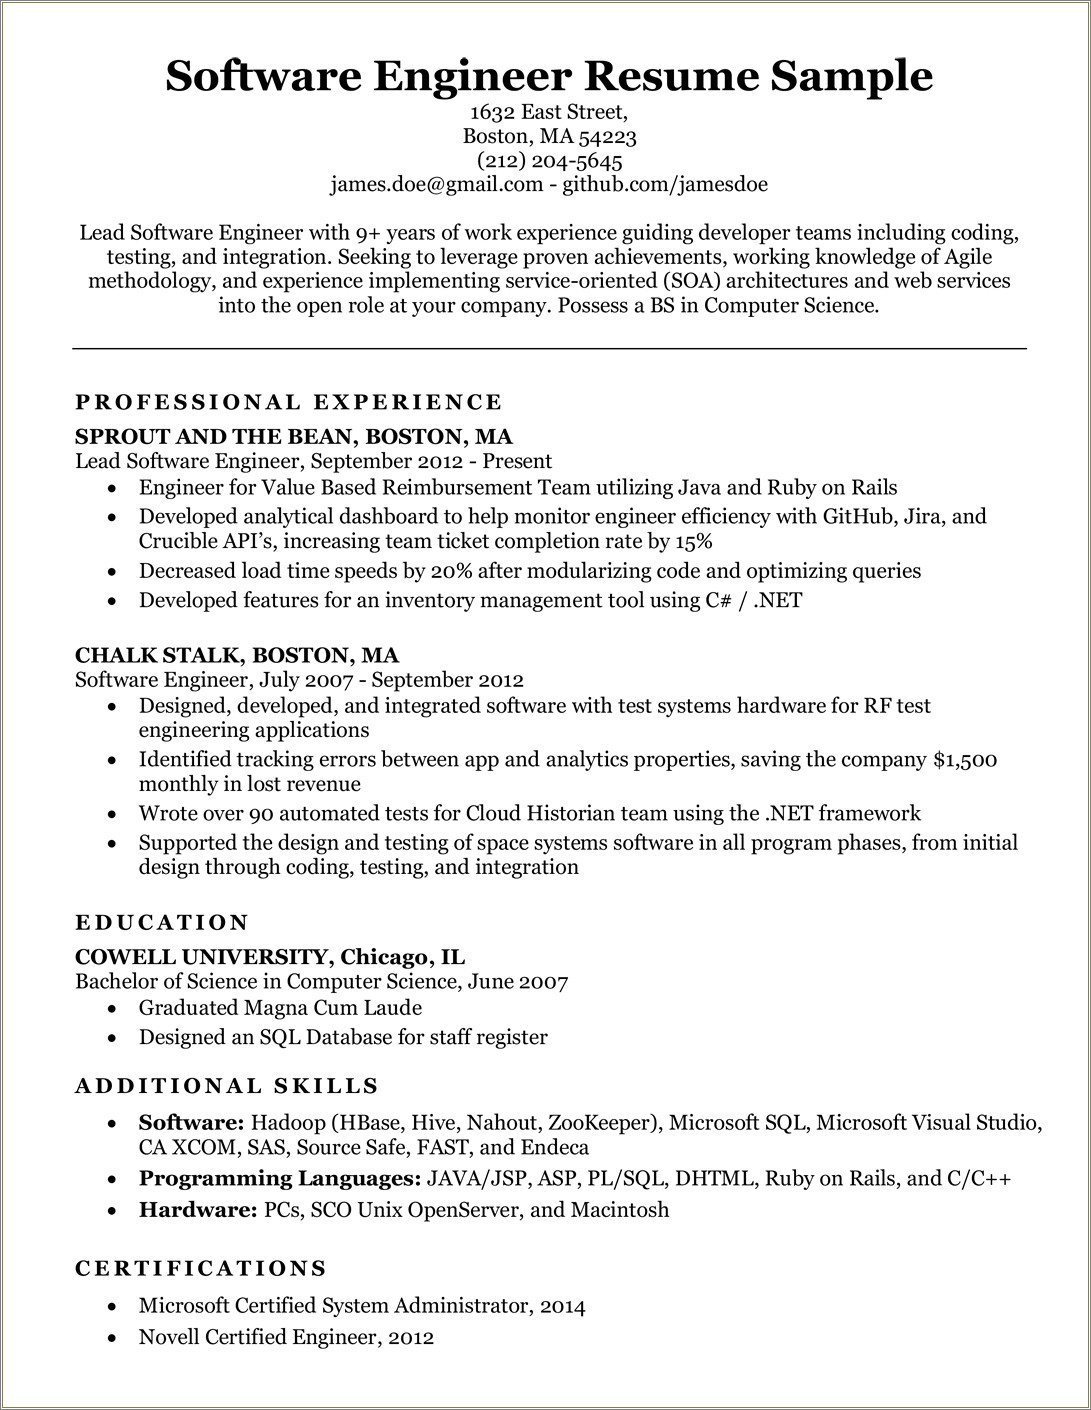 Sample Resume For Experienced Net Professional